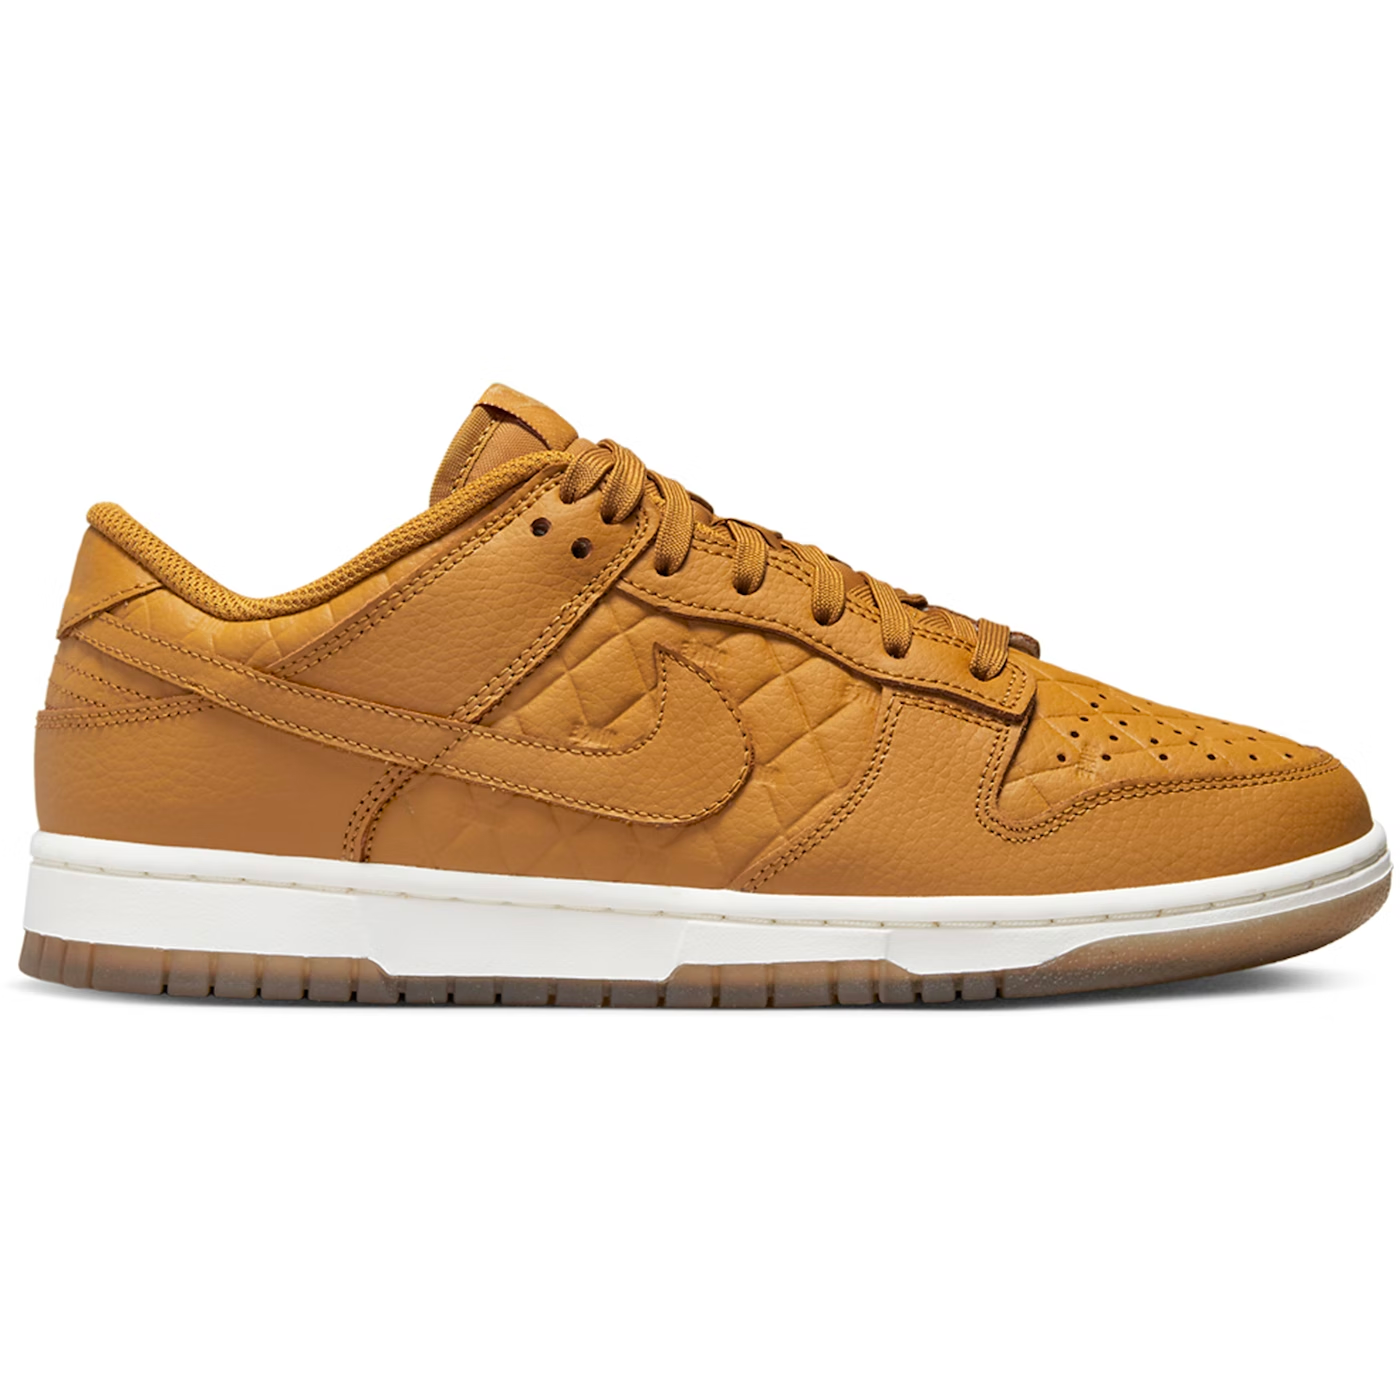 Nike Dunk Low Quilted Wheat - 9 M / 10.5 W